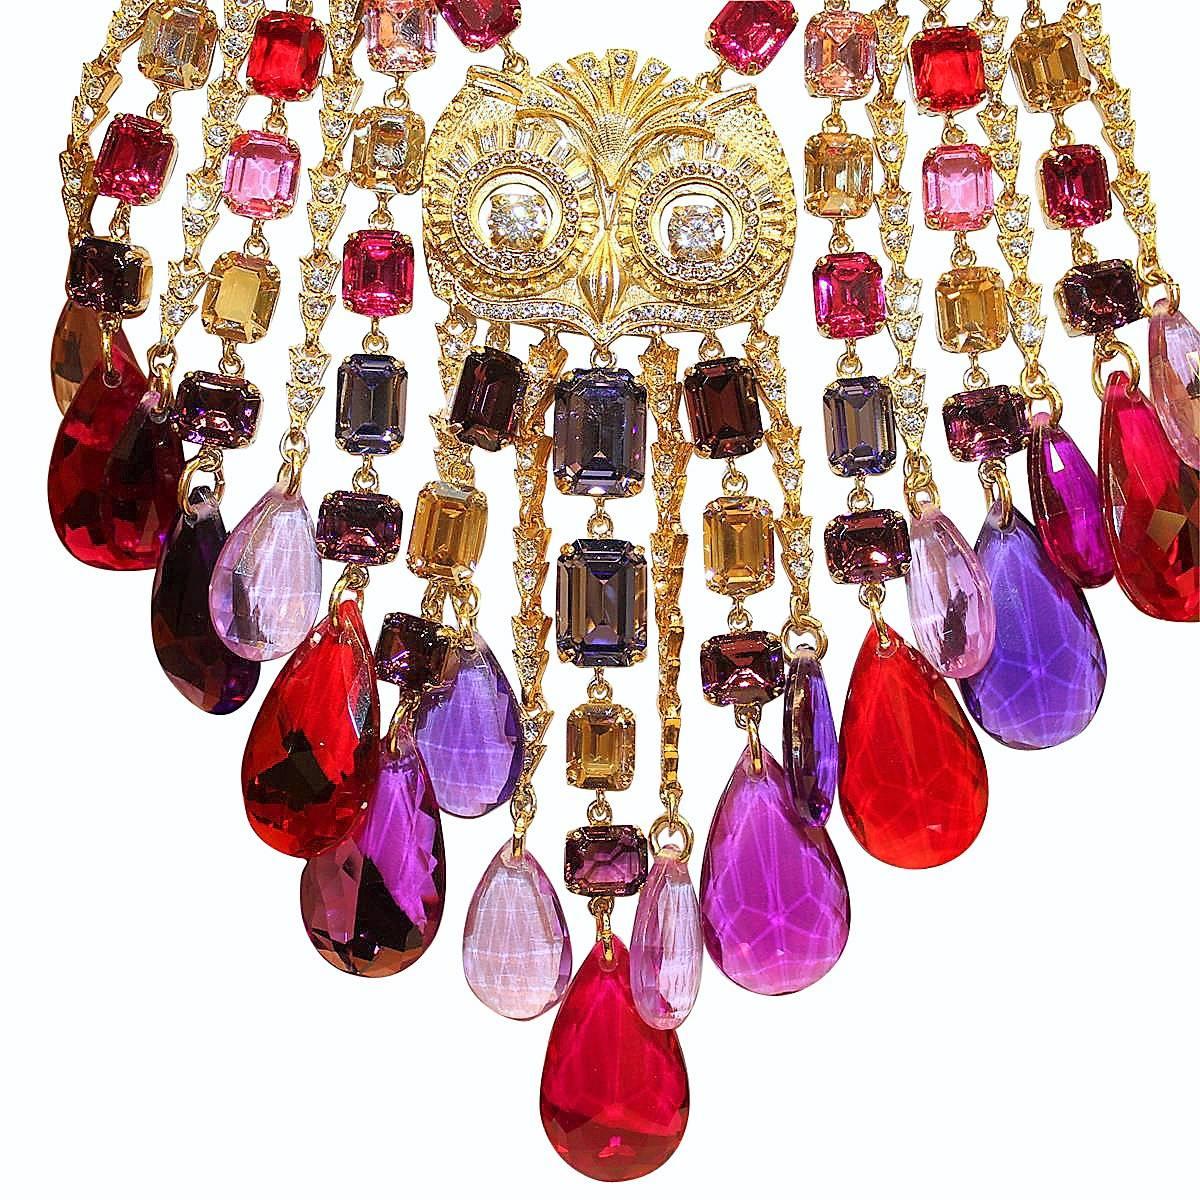 Incredible necklace by Carlo Zini bijoux Milano
One of the world's best bijoux designers
Long necklace 
Non allergenic rhodium
Gold dipped
Wonderful construction of crystals, rhinestones and rmulticolored esins
Owl theme
Unique piece !
100%